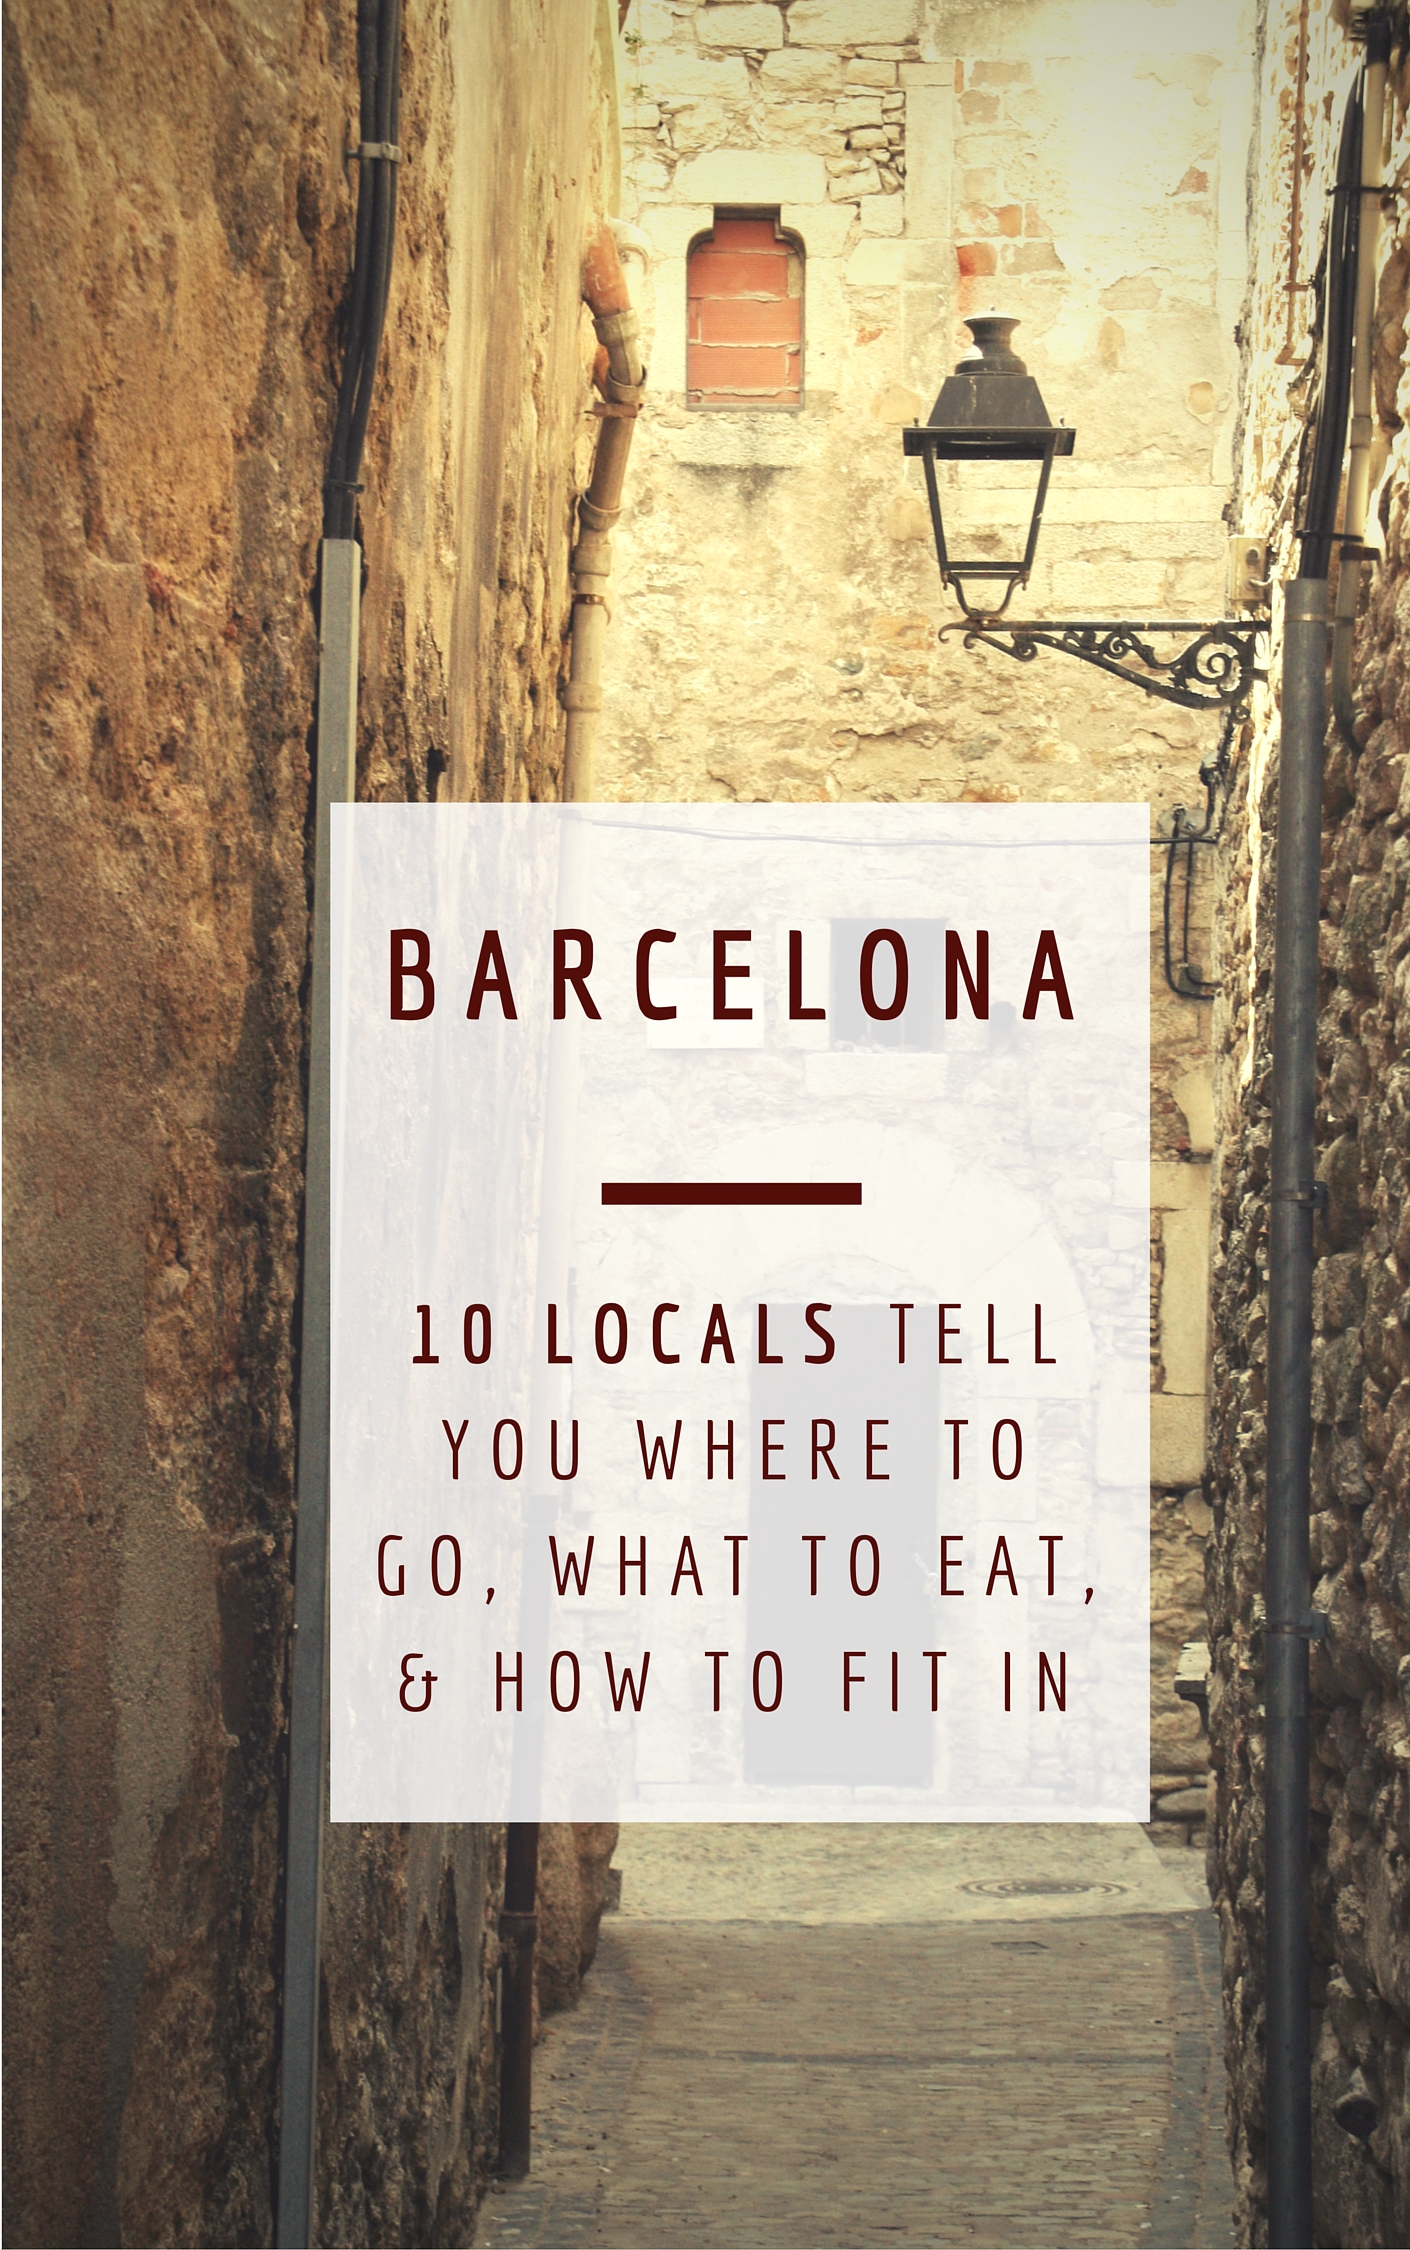 Barcelona - 10 locals tell you where to go, what to eat, and how to fit in